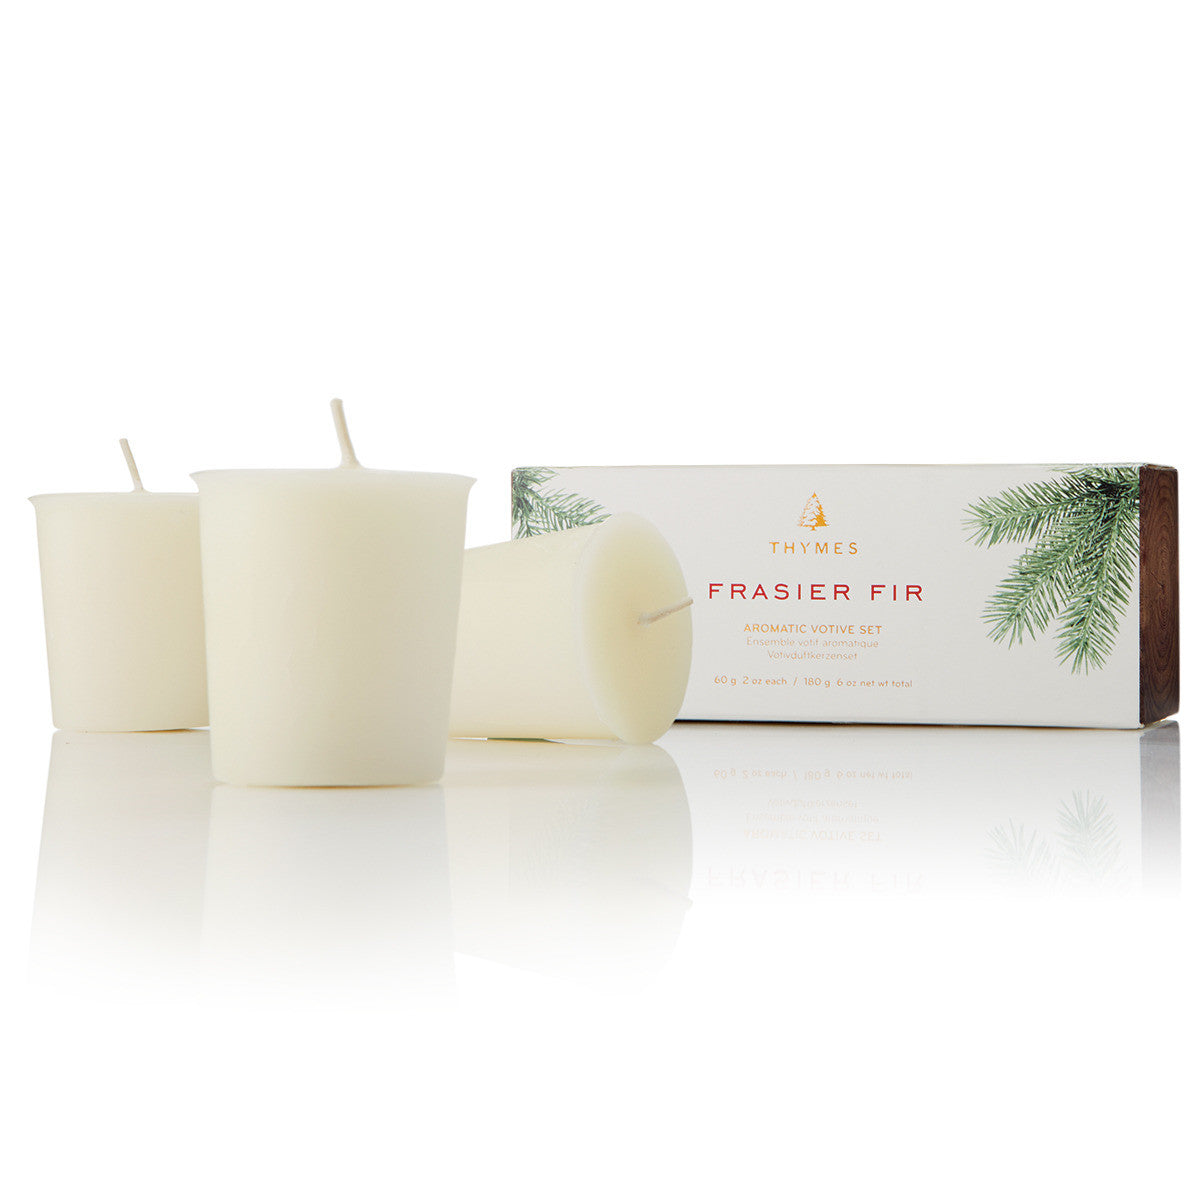  Thymes Frasier Fir Votive Candle Set, TC-Thymes Collection, Putti Fine Furnishings